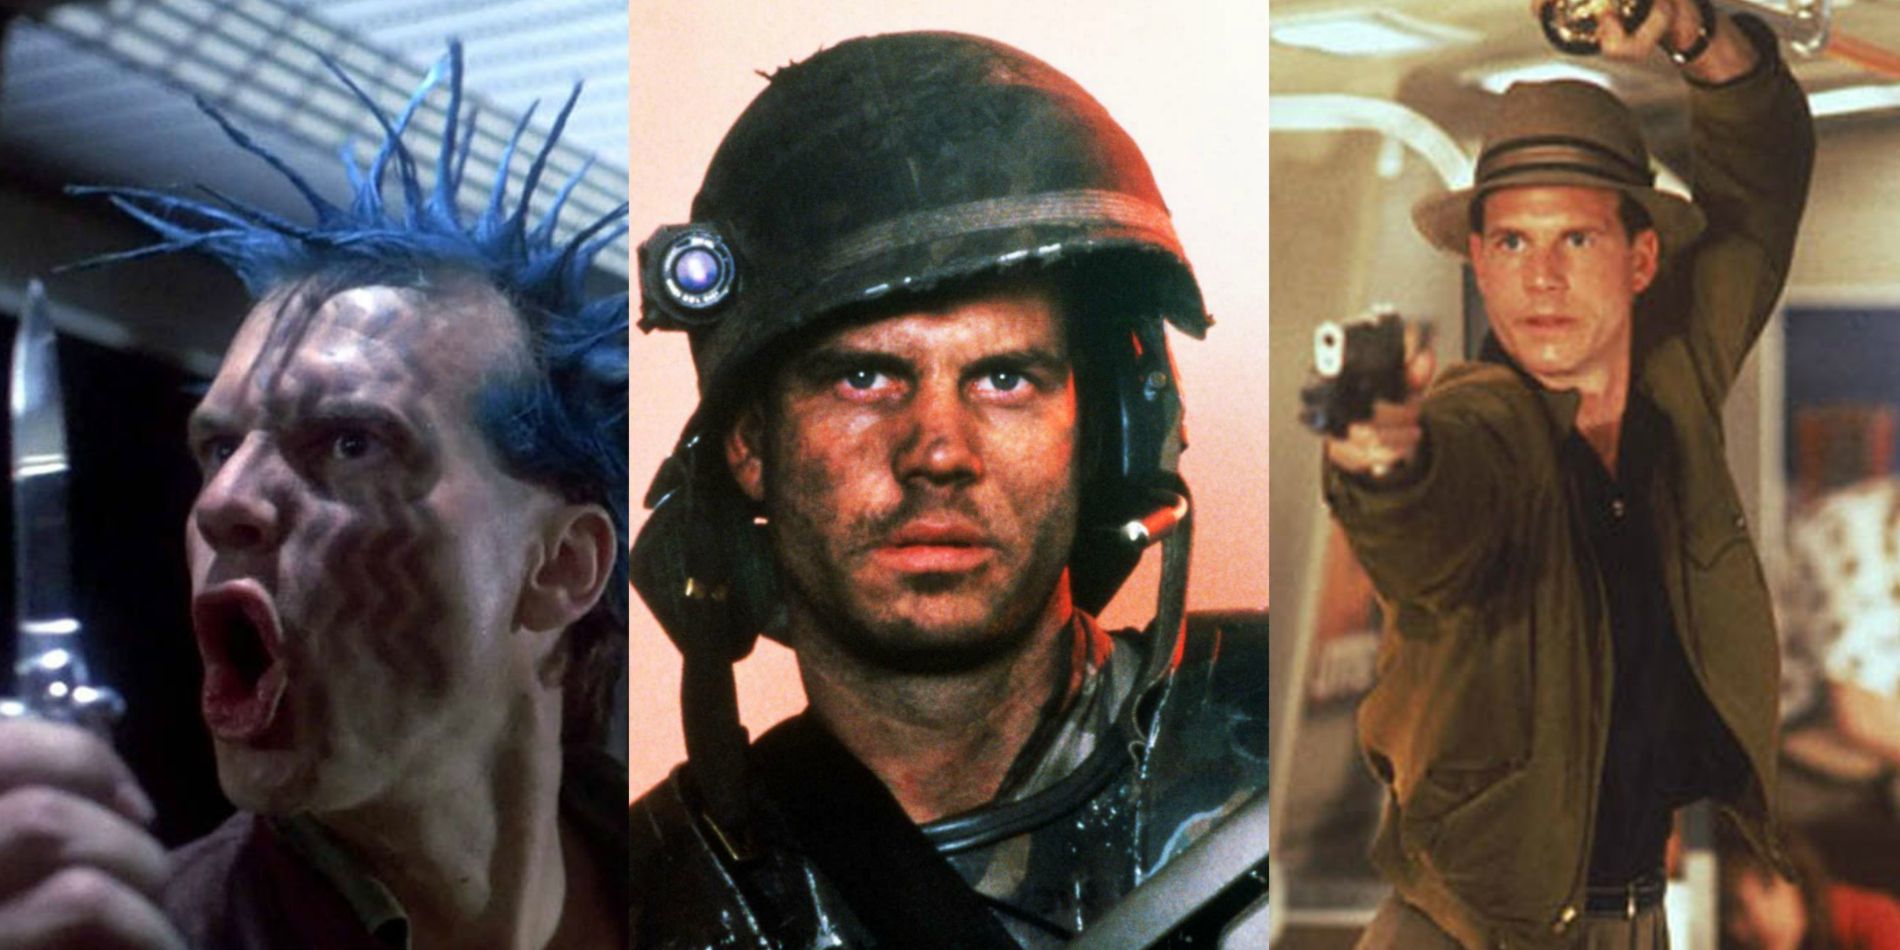 Bill Paxton and Lance Henriksen, The only 2 actors to be killed by